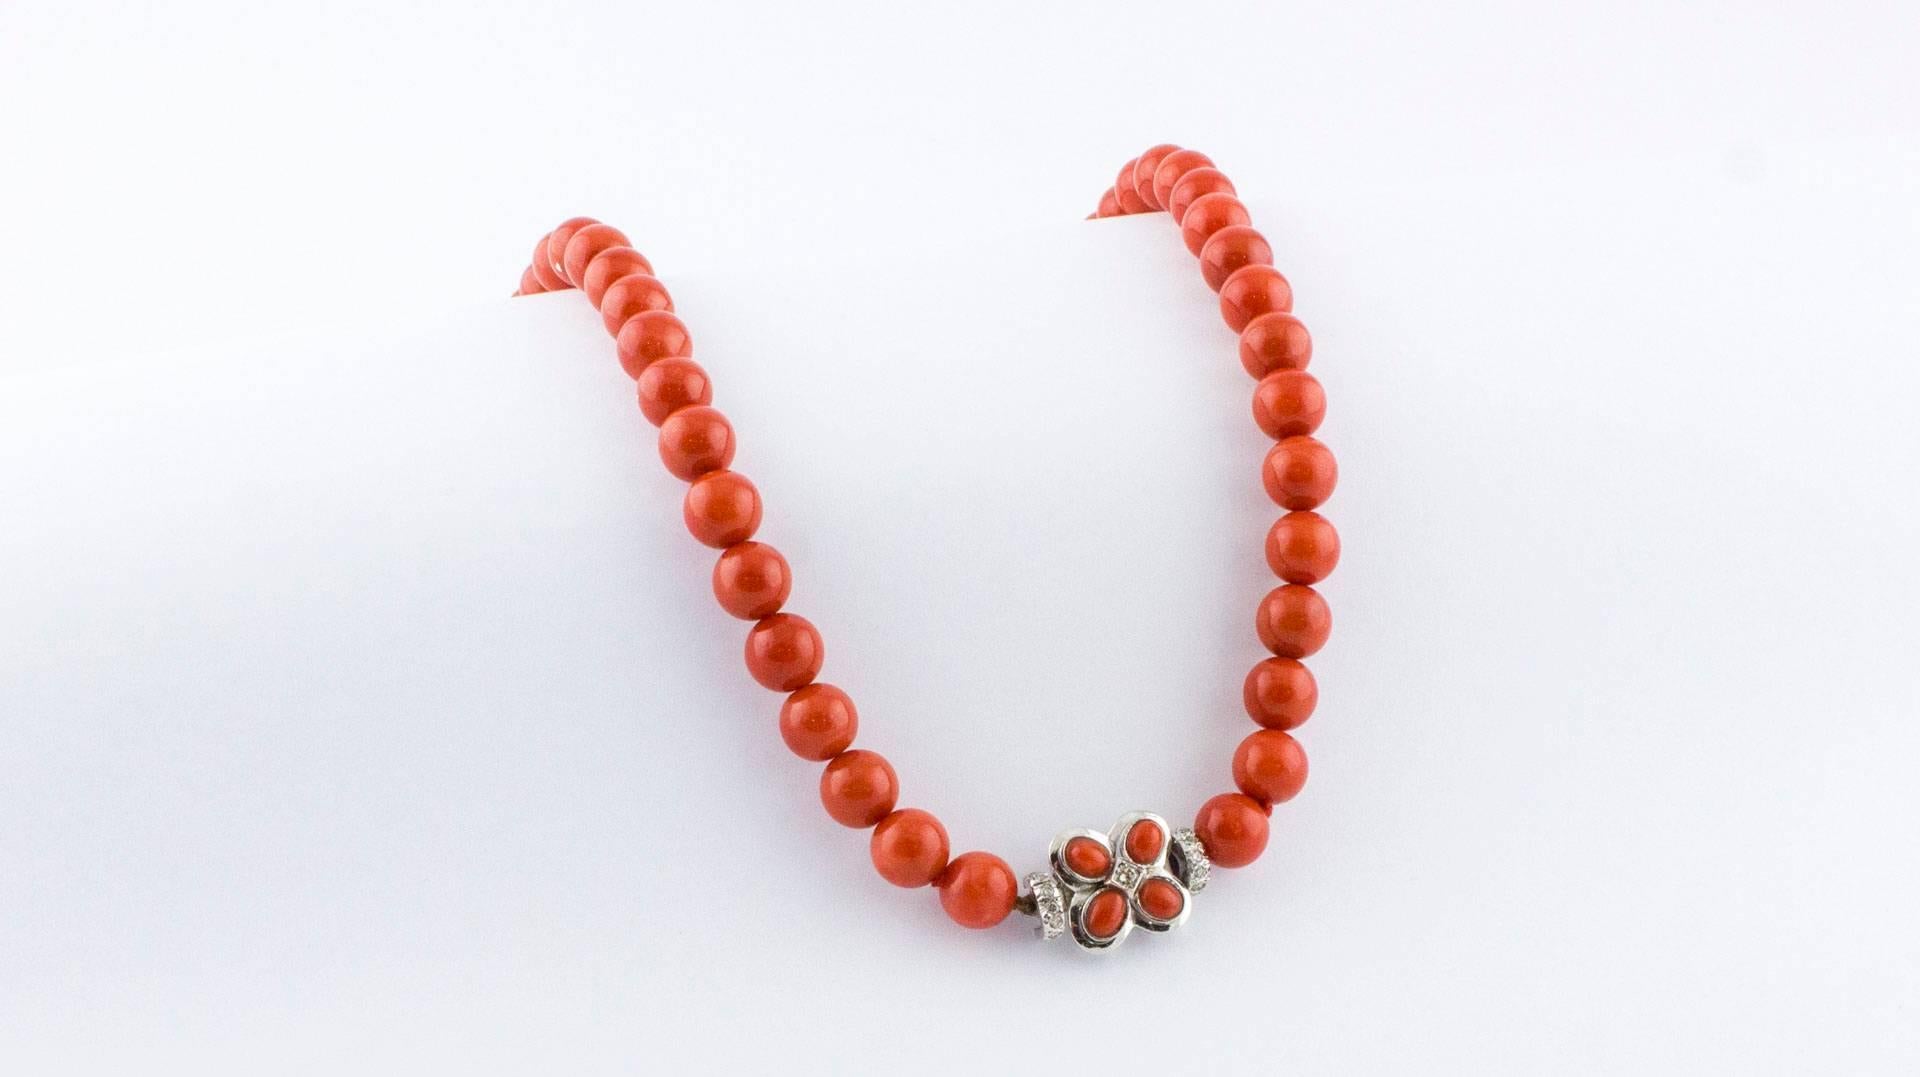 Italian Natural Coral Top Quality  Chocker Necklace, the clasp is made in 14 kt White Gold 
Diamonds Ct 0.48
Coral 53.33 gr (diameter 9 mm)
Total Weight 59,50 gr

R.f. hrrf

